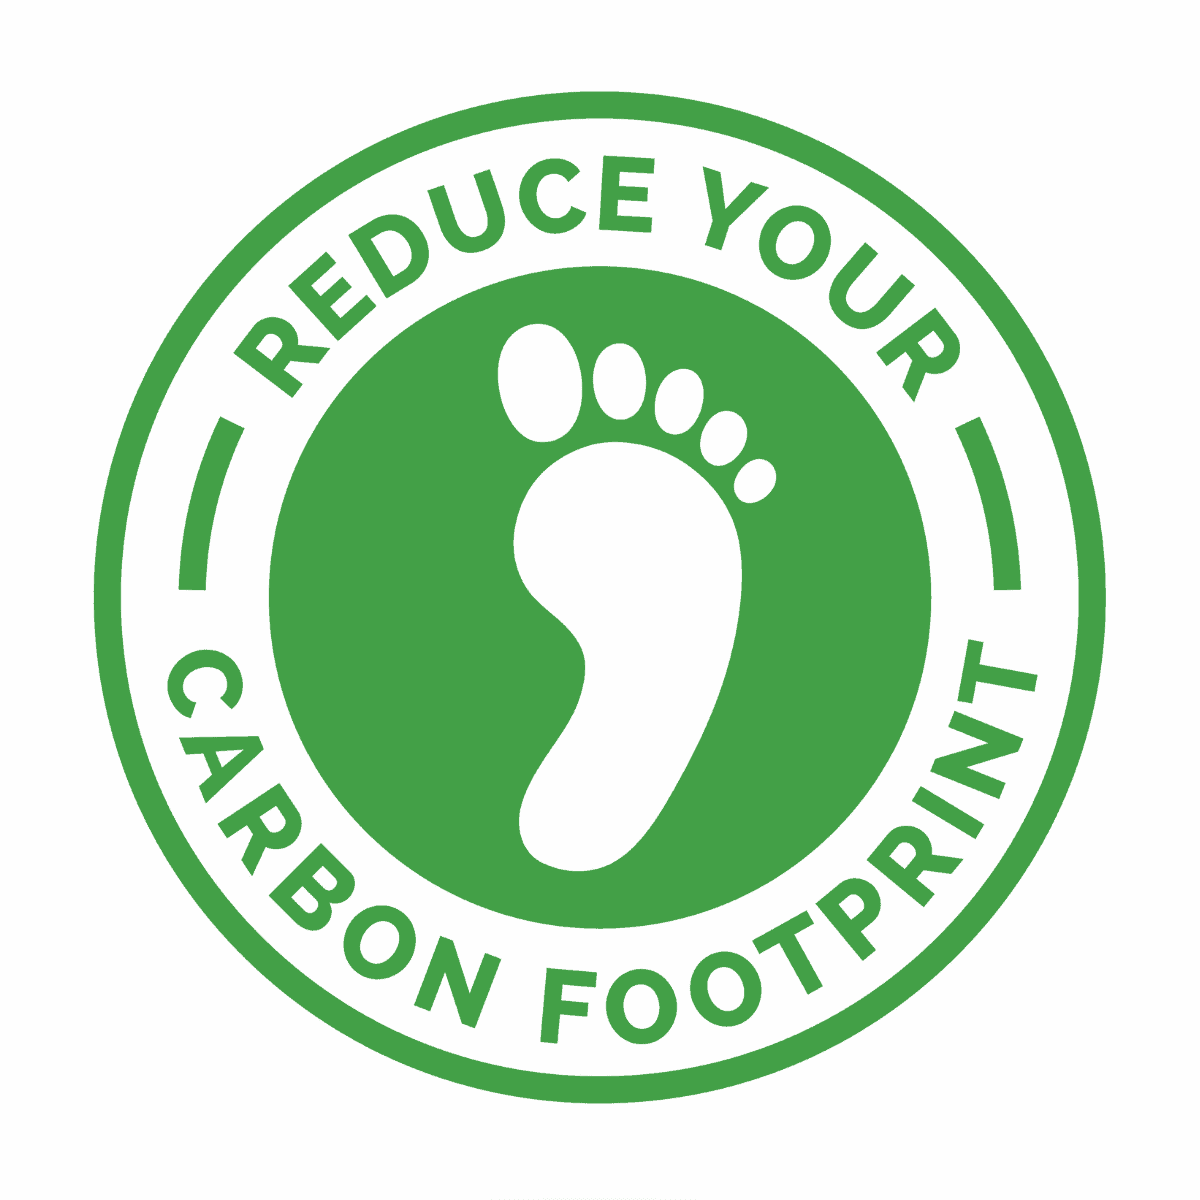 Reduce your carbon footprint icon symbol with green environment footprint badge. Vector illustration.